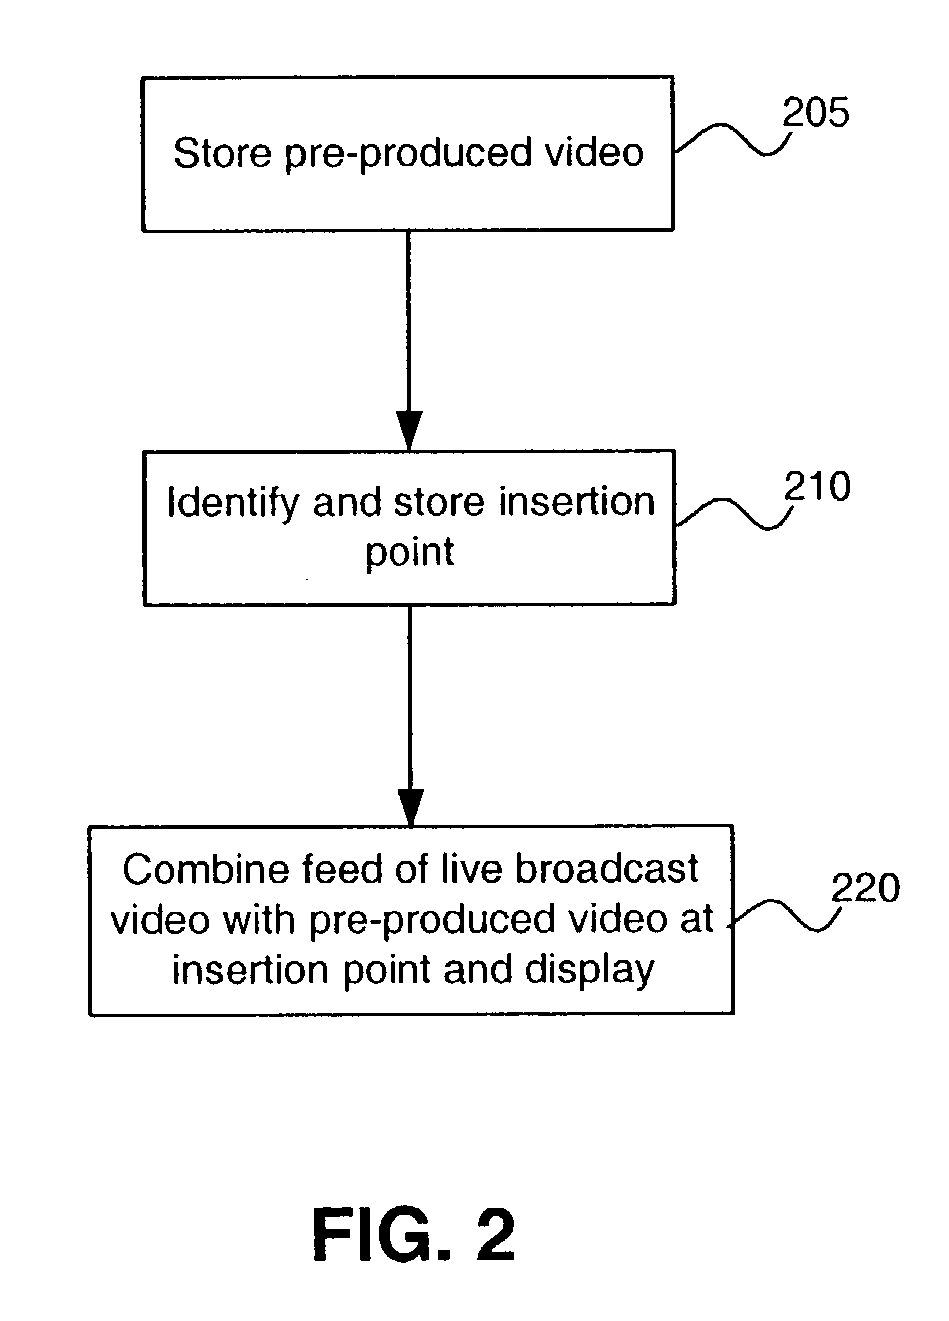 System and method for inserting live video into pre-produced video